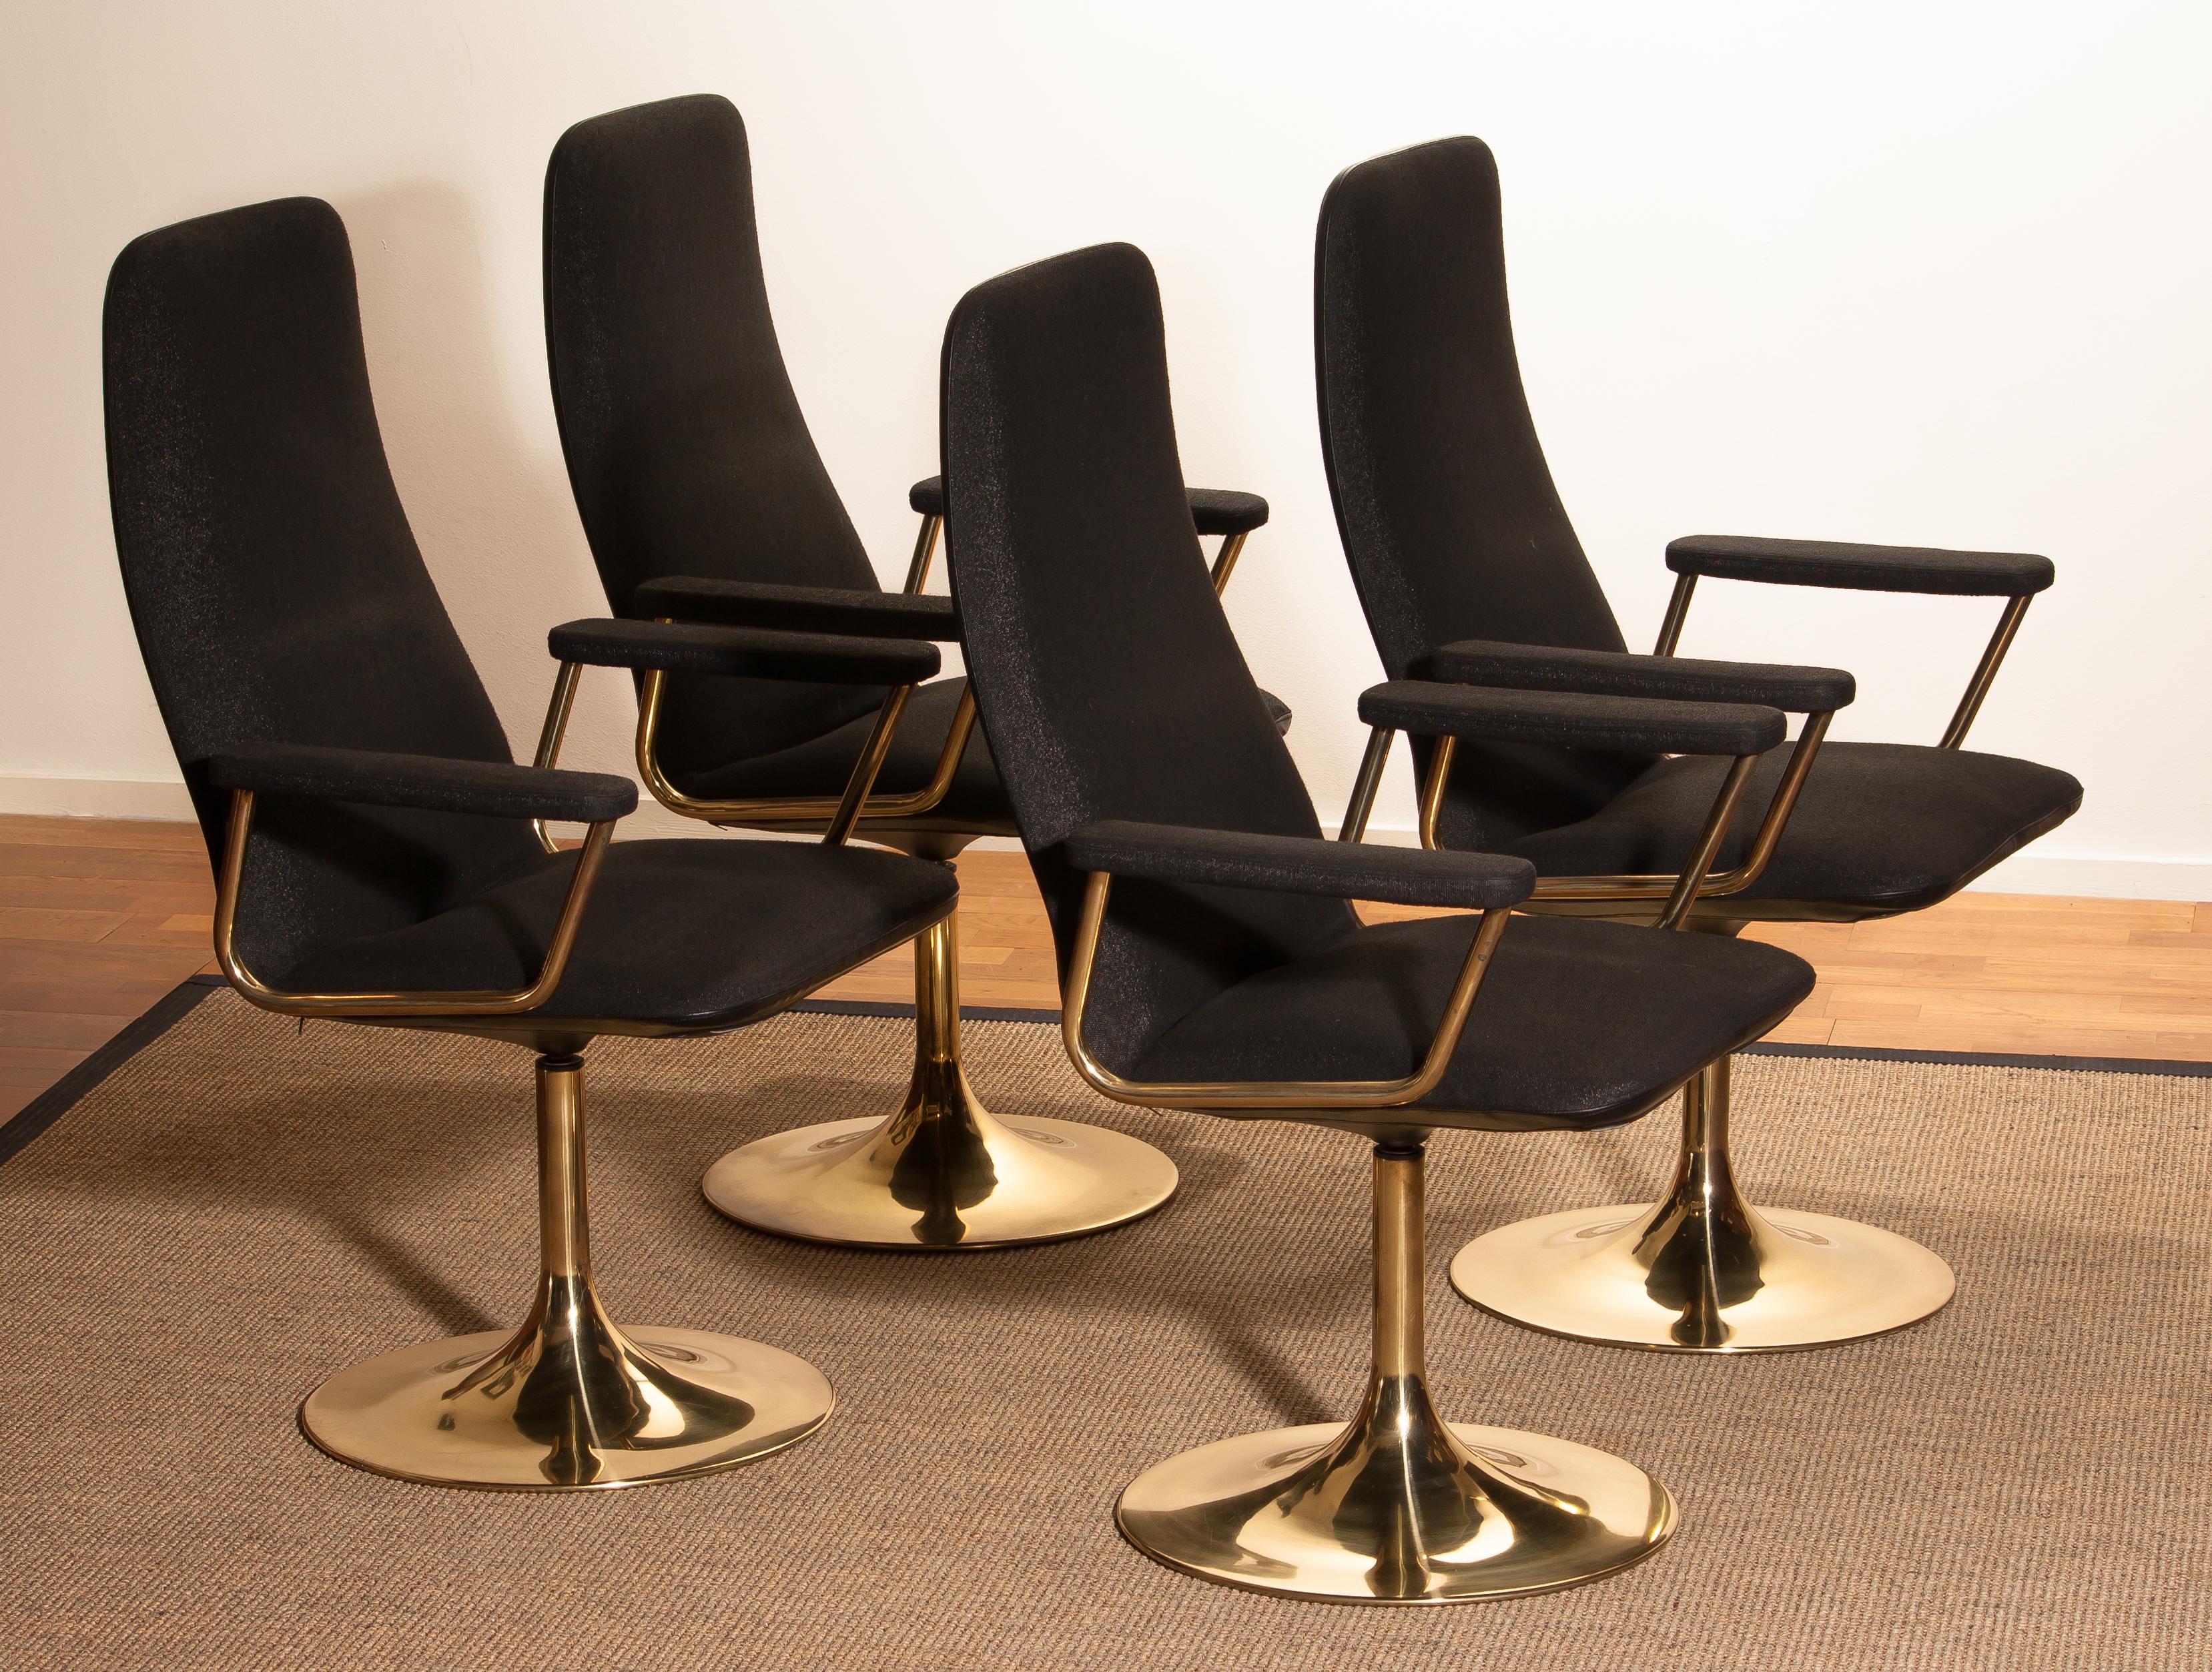 Four Golden, with Black Fabric, Armrest Swivel Chairs by Johanson Design, 1970 In Good Condition In Silvolde, Gelderland